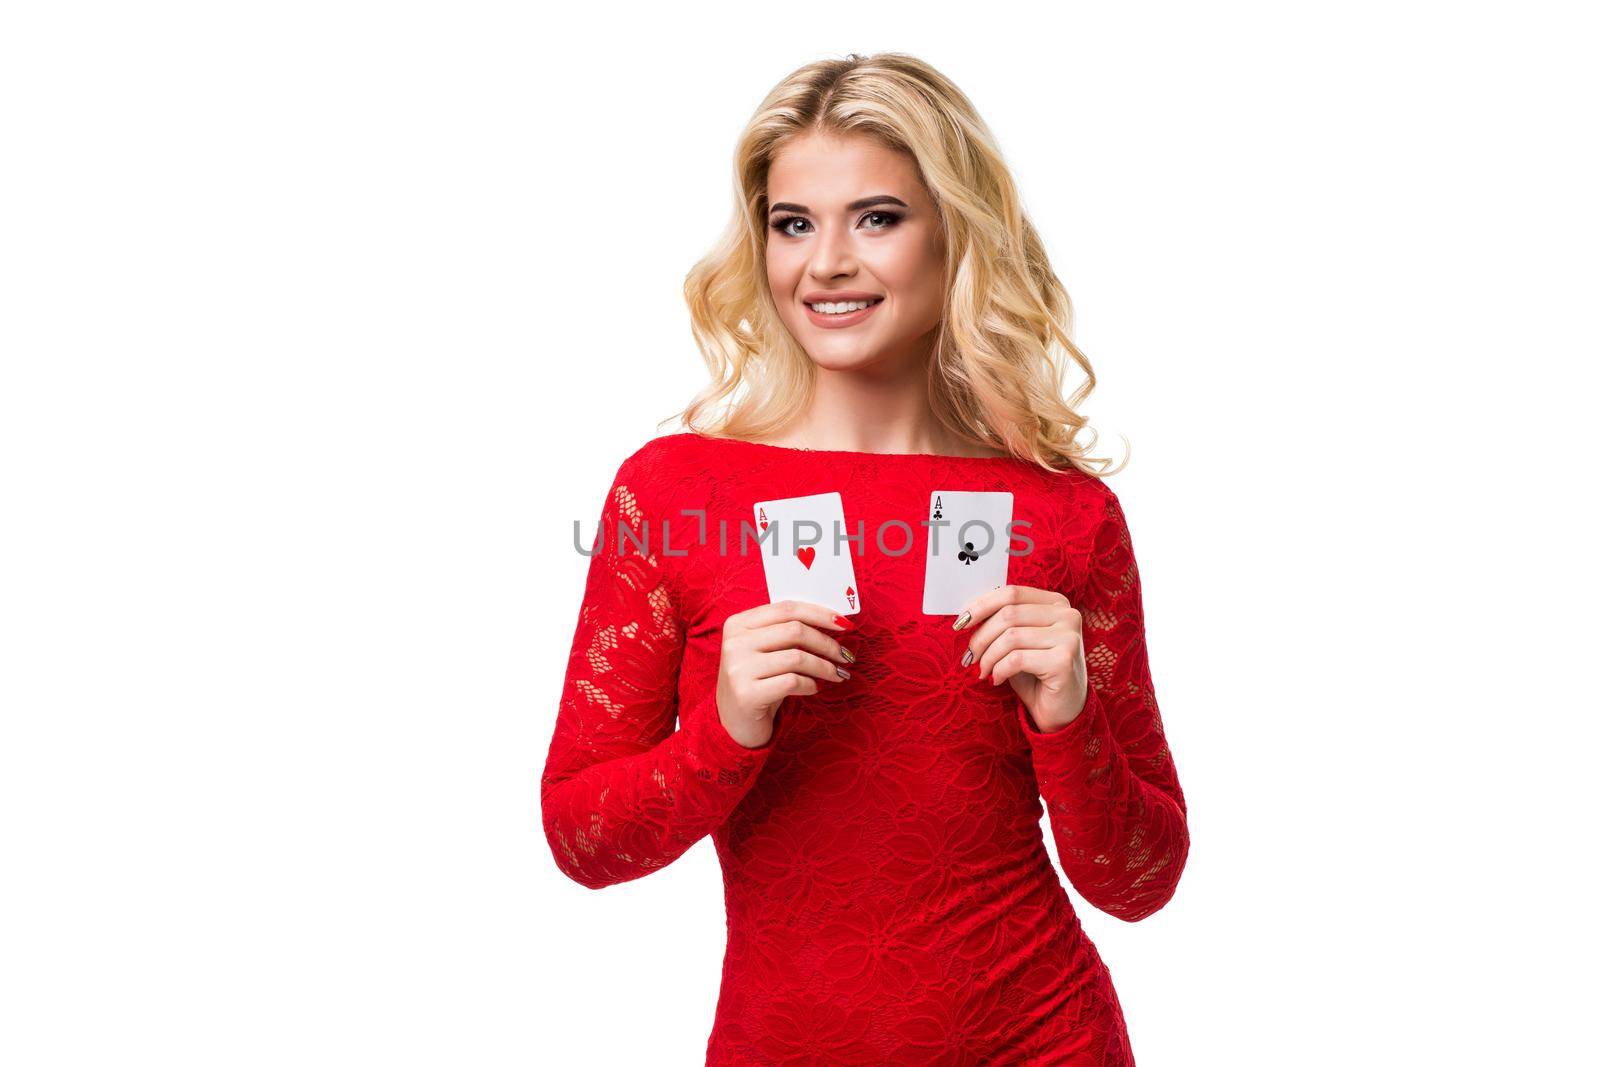 Caucasian young woman with long light blonde hair in evening outfit holding playing cards. Isolated. Poker by nazarovsergey